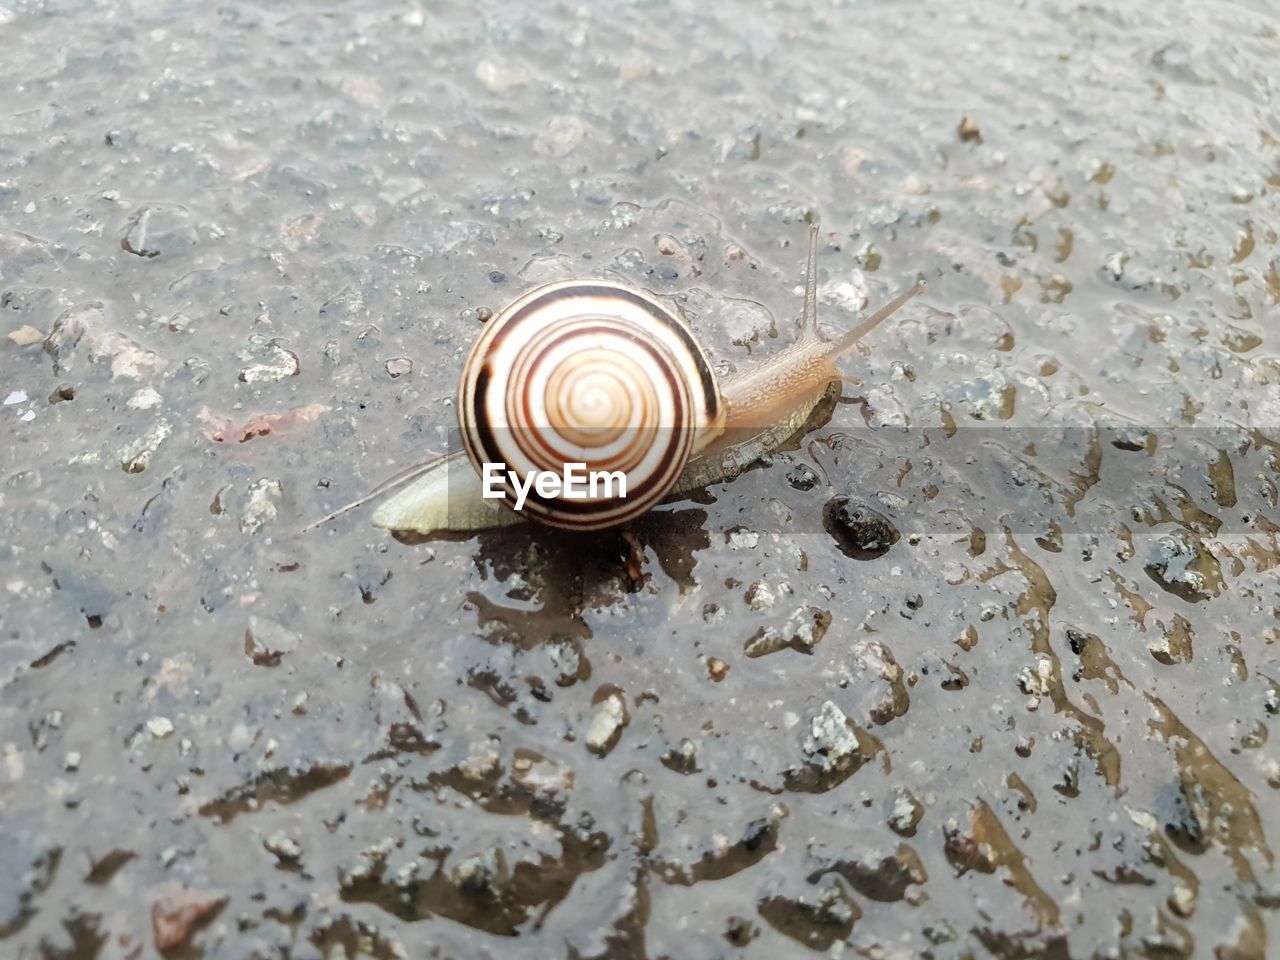 CLOSE-UP OF SNAIL ON WET LAND